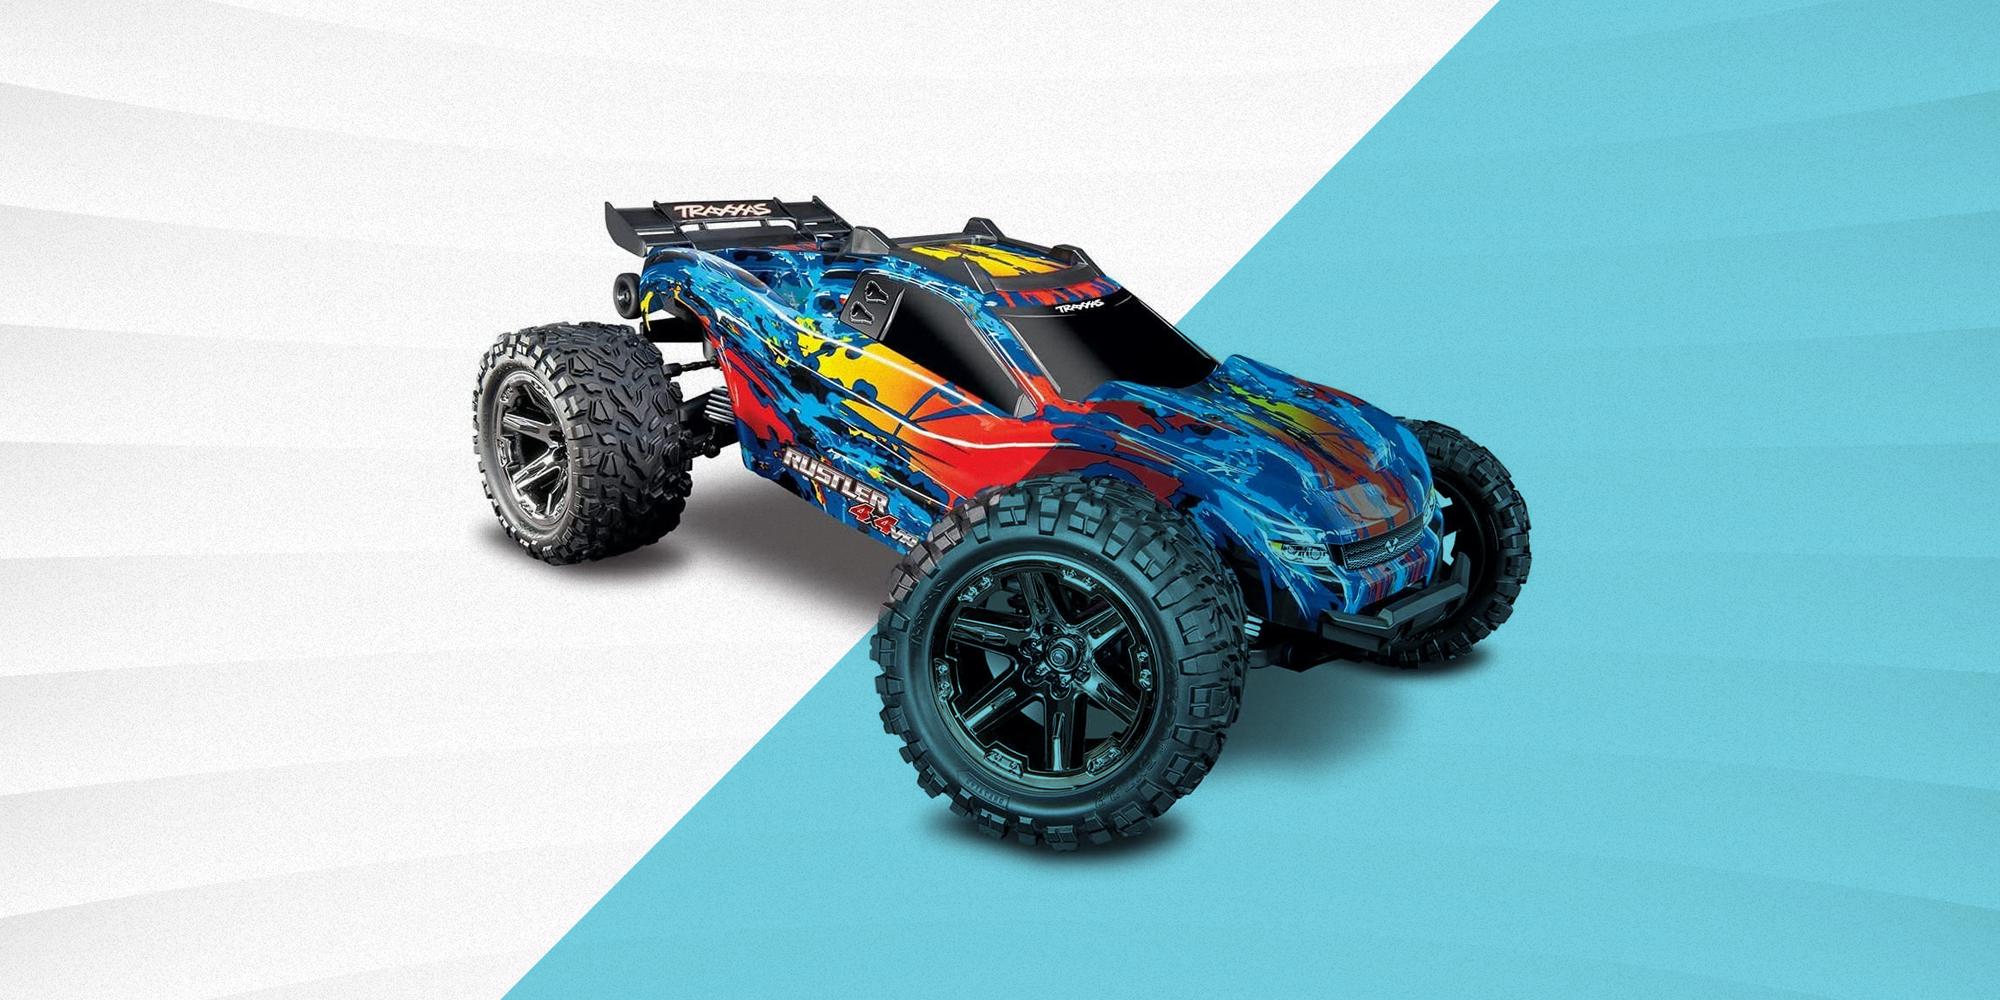 Remote Control Gas Powered Rc Cars: Popular Types of Remote Control Gas-Powered RC Cars